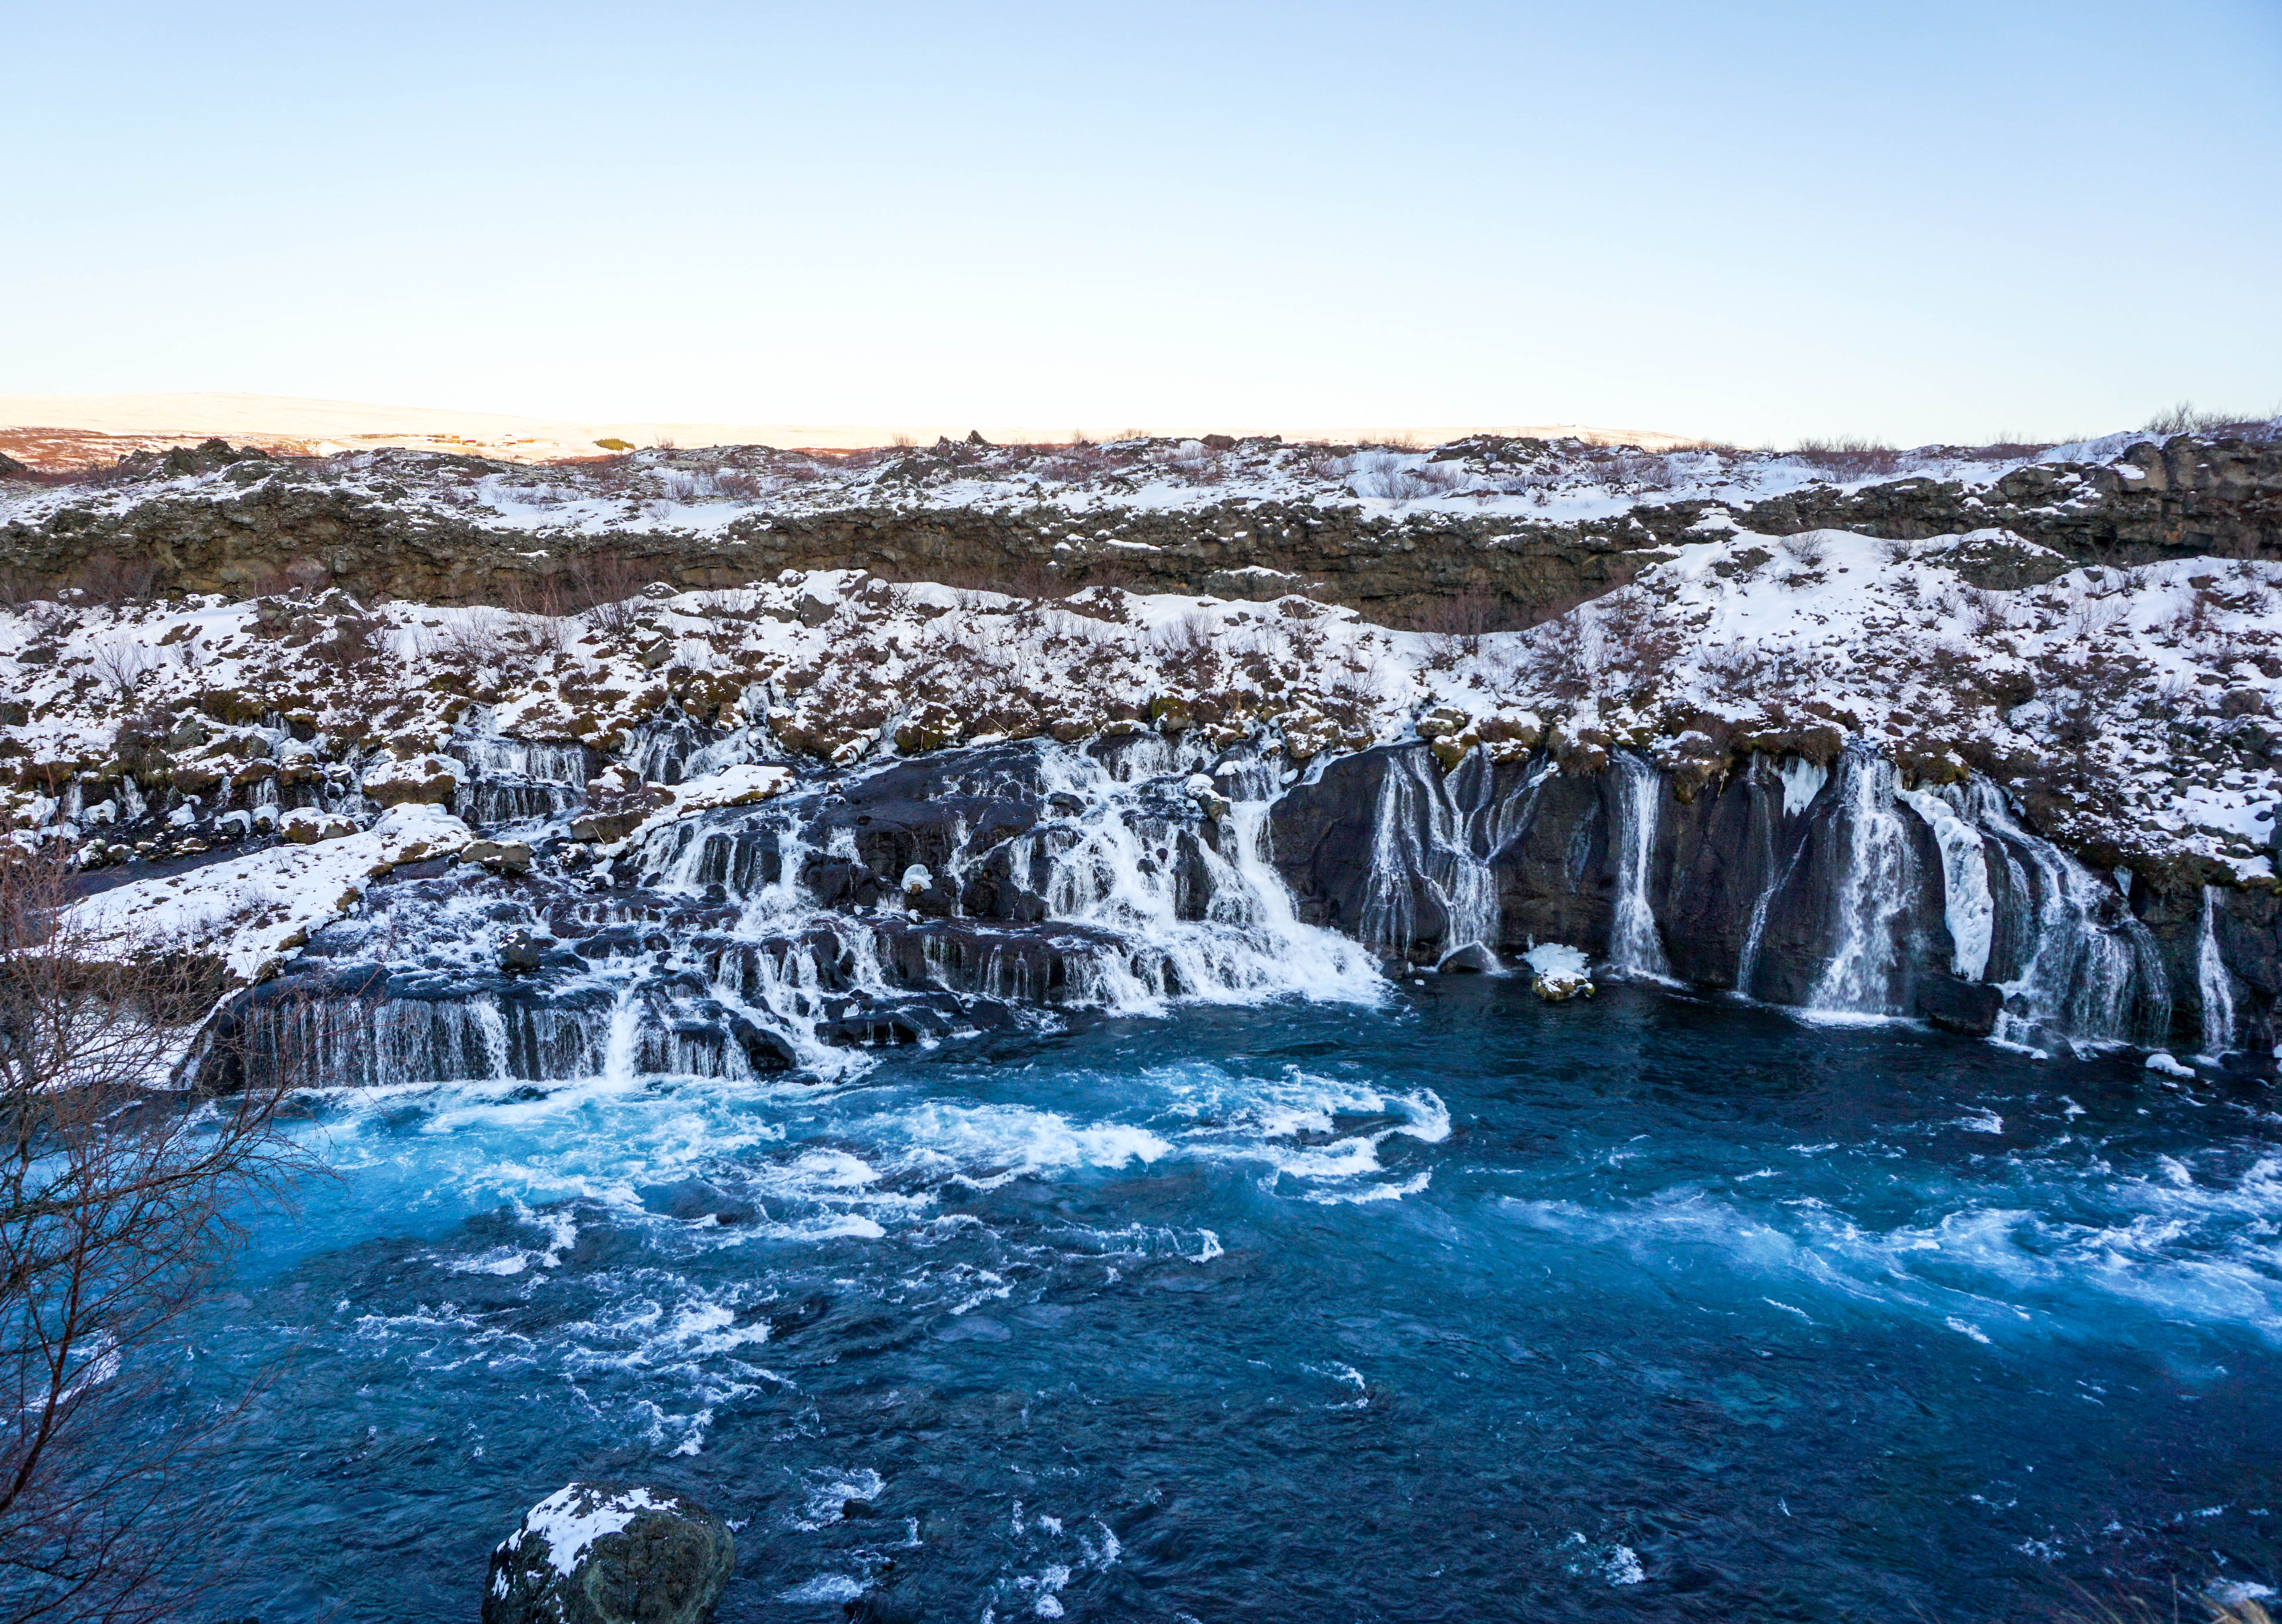 Looking for some Hidden Gems in Iceland? Get off the beaten path by visiting Hraunfossar & Barnafoss waterfalls, a quick day trip from Reykjavik! | Life With a View